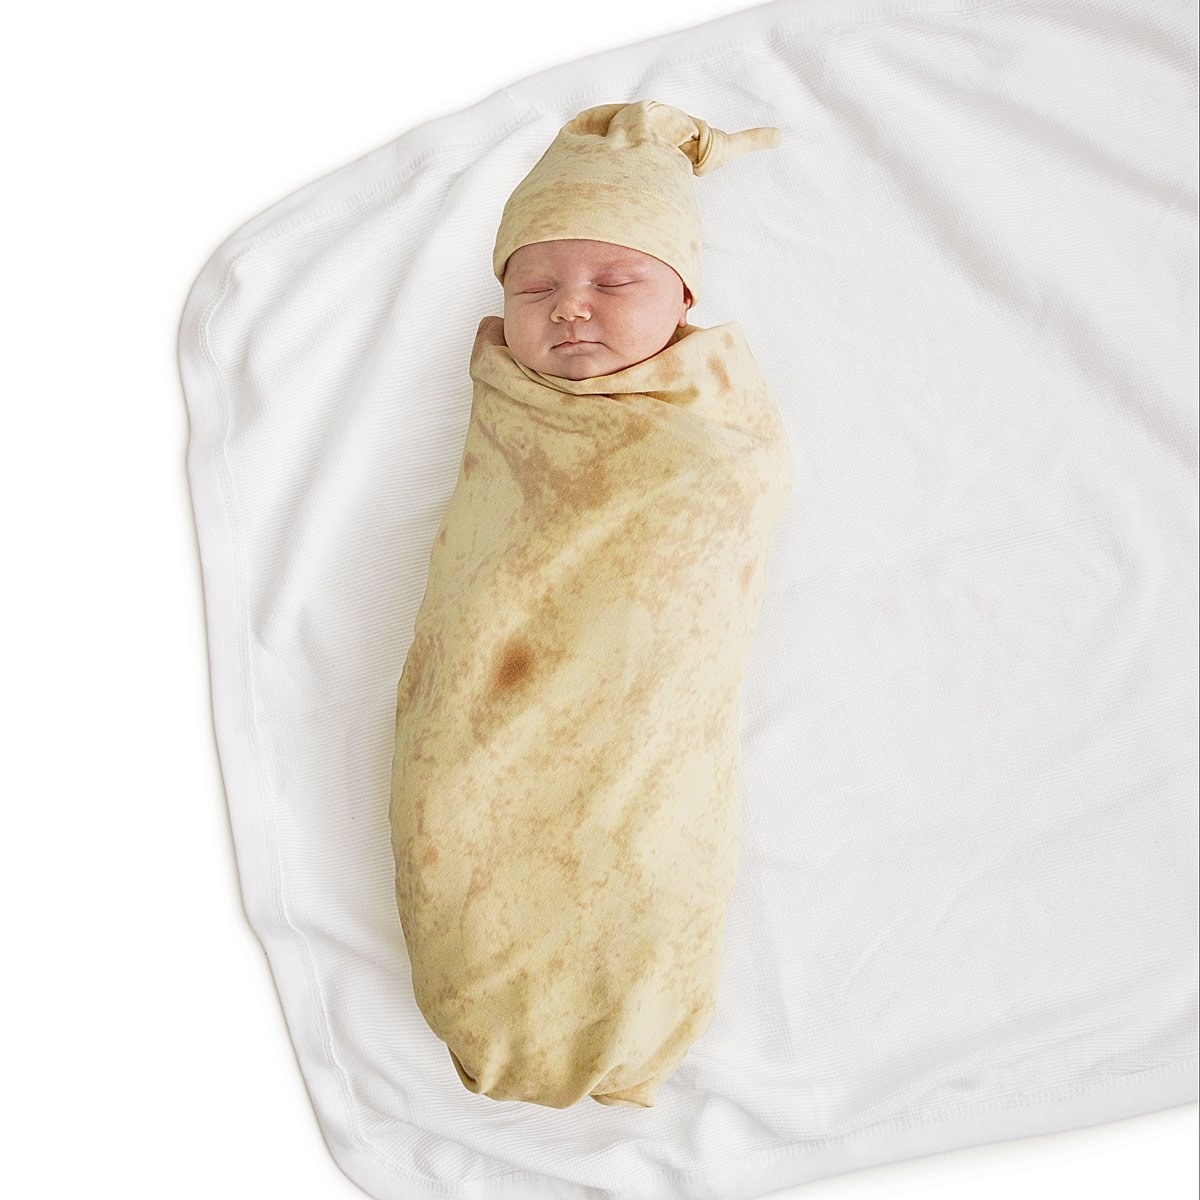 baby sleeping in the tortilla swaddle